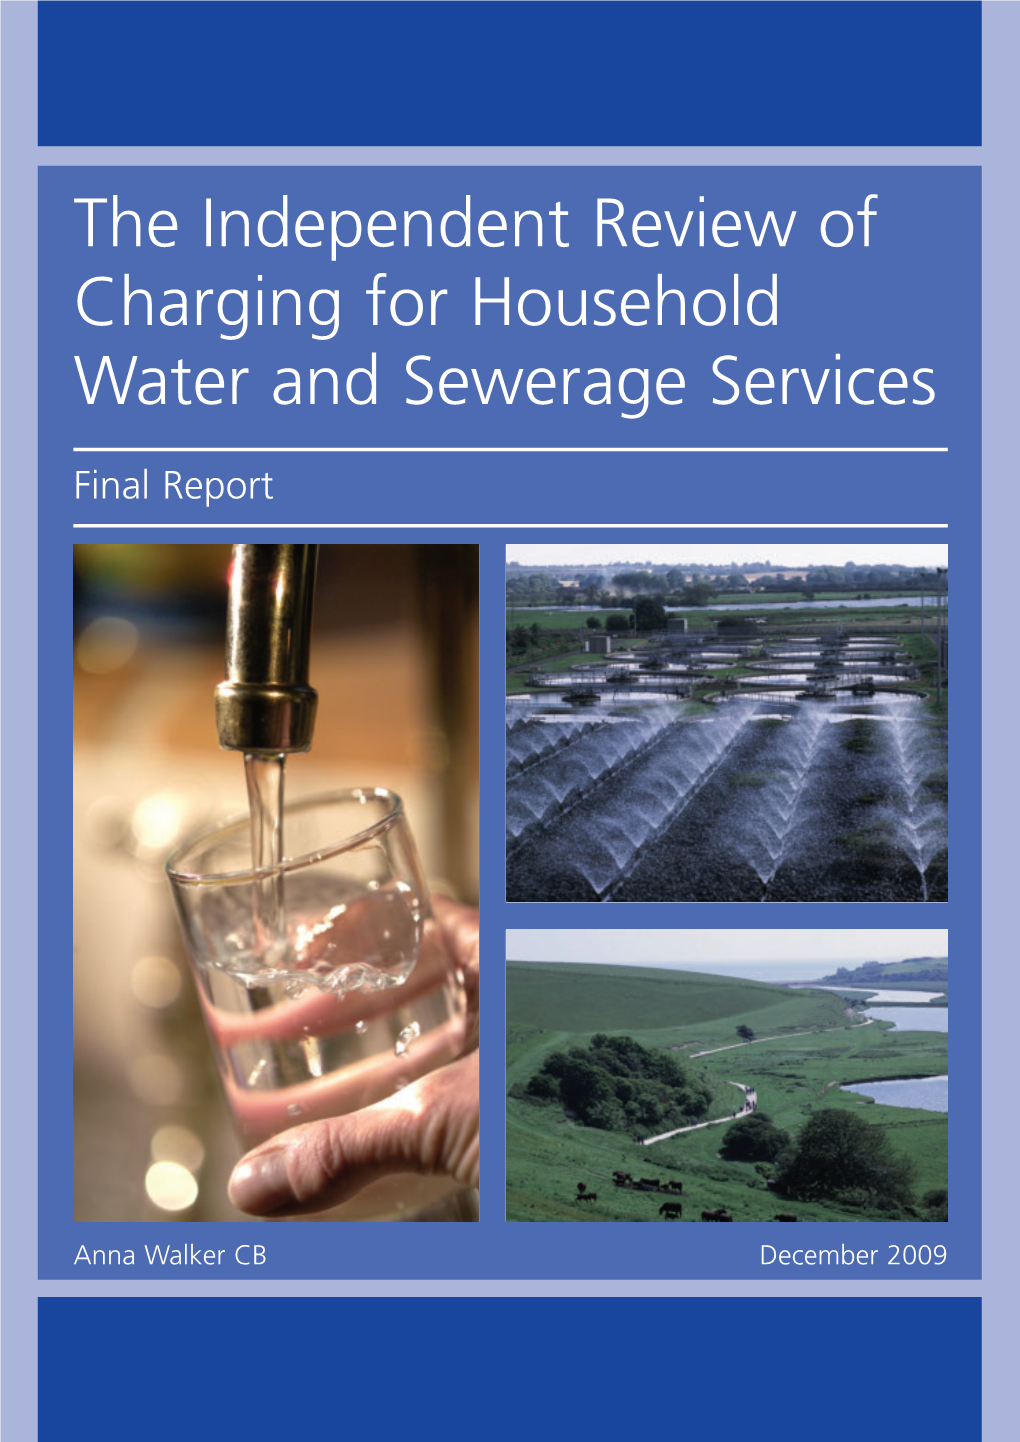 The Independent Review of Charging for Household Water and Sewerage Services